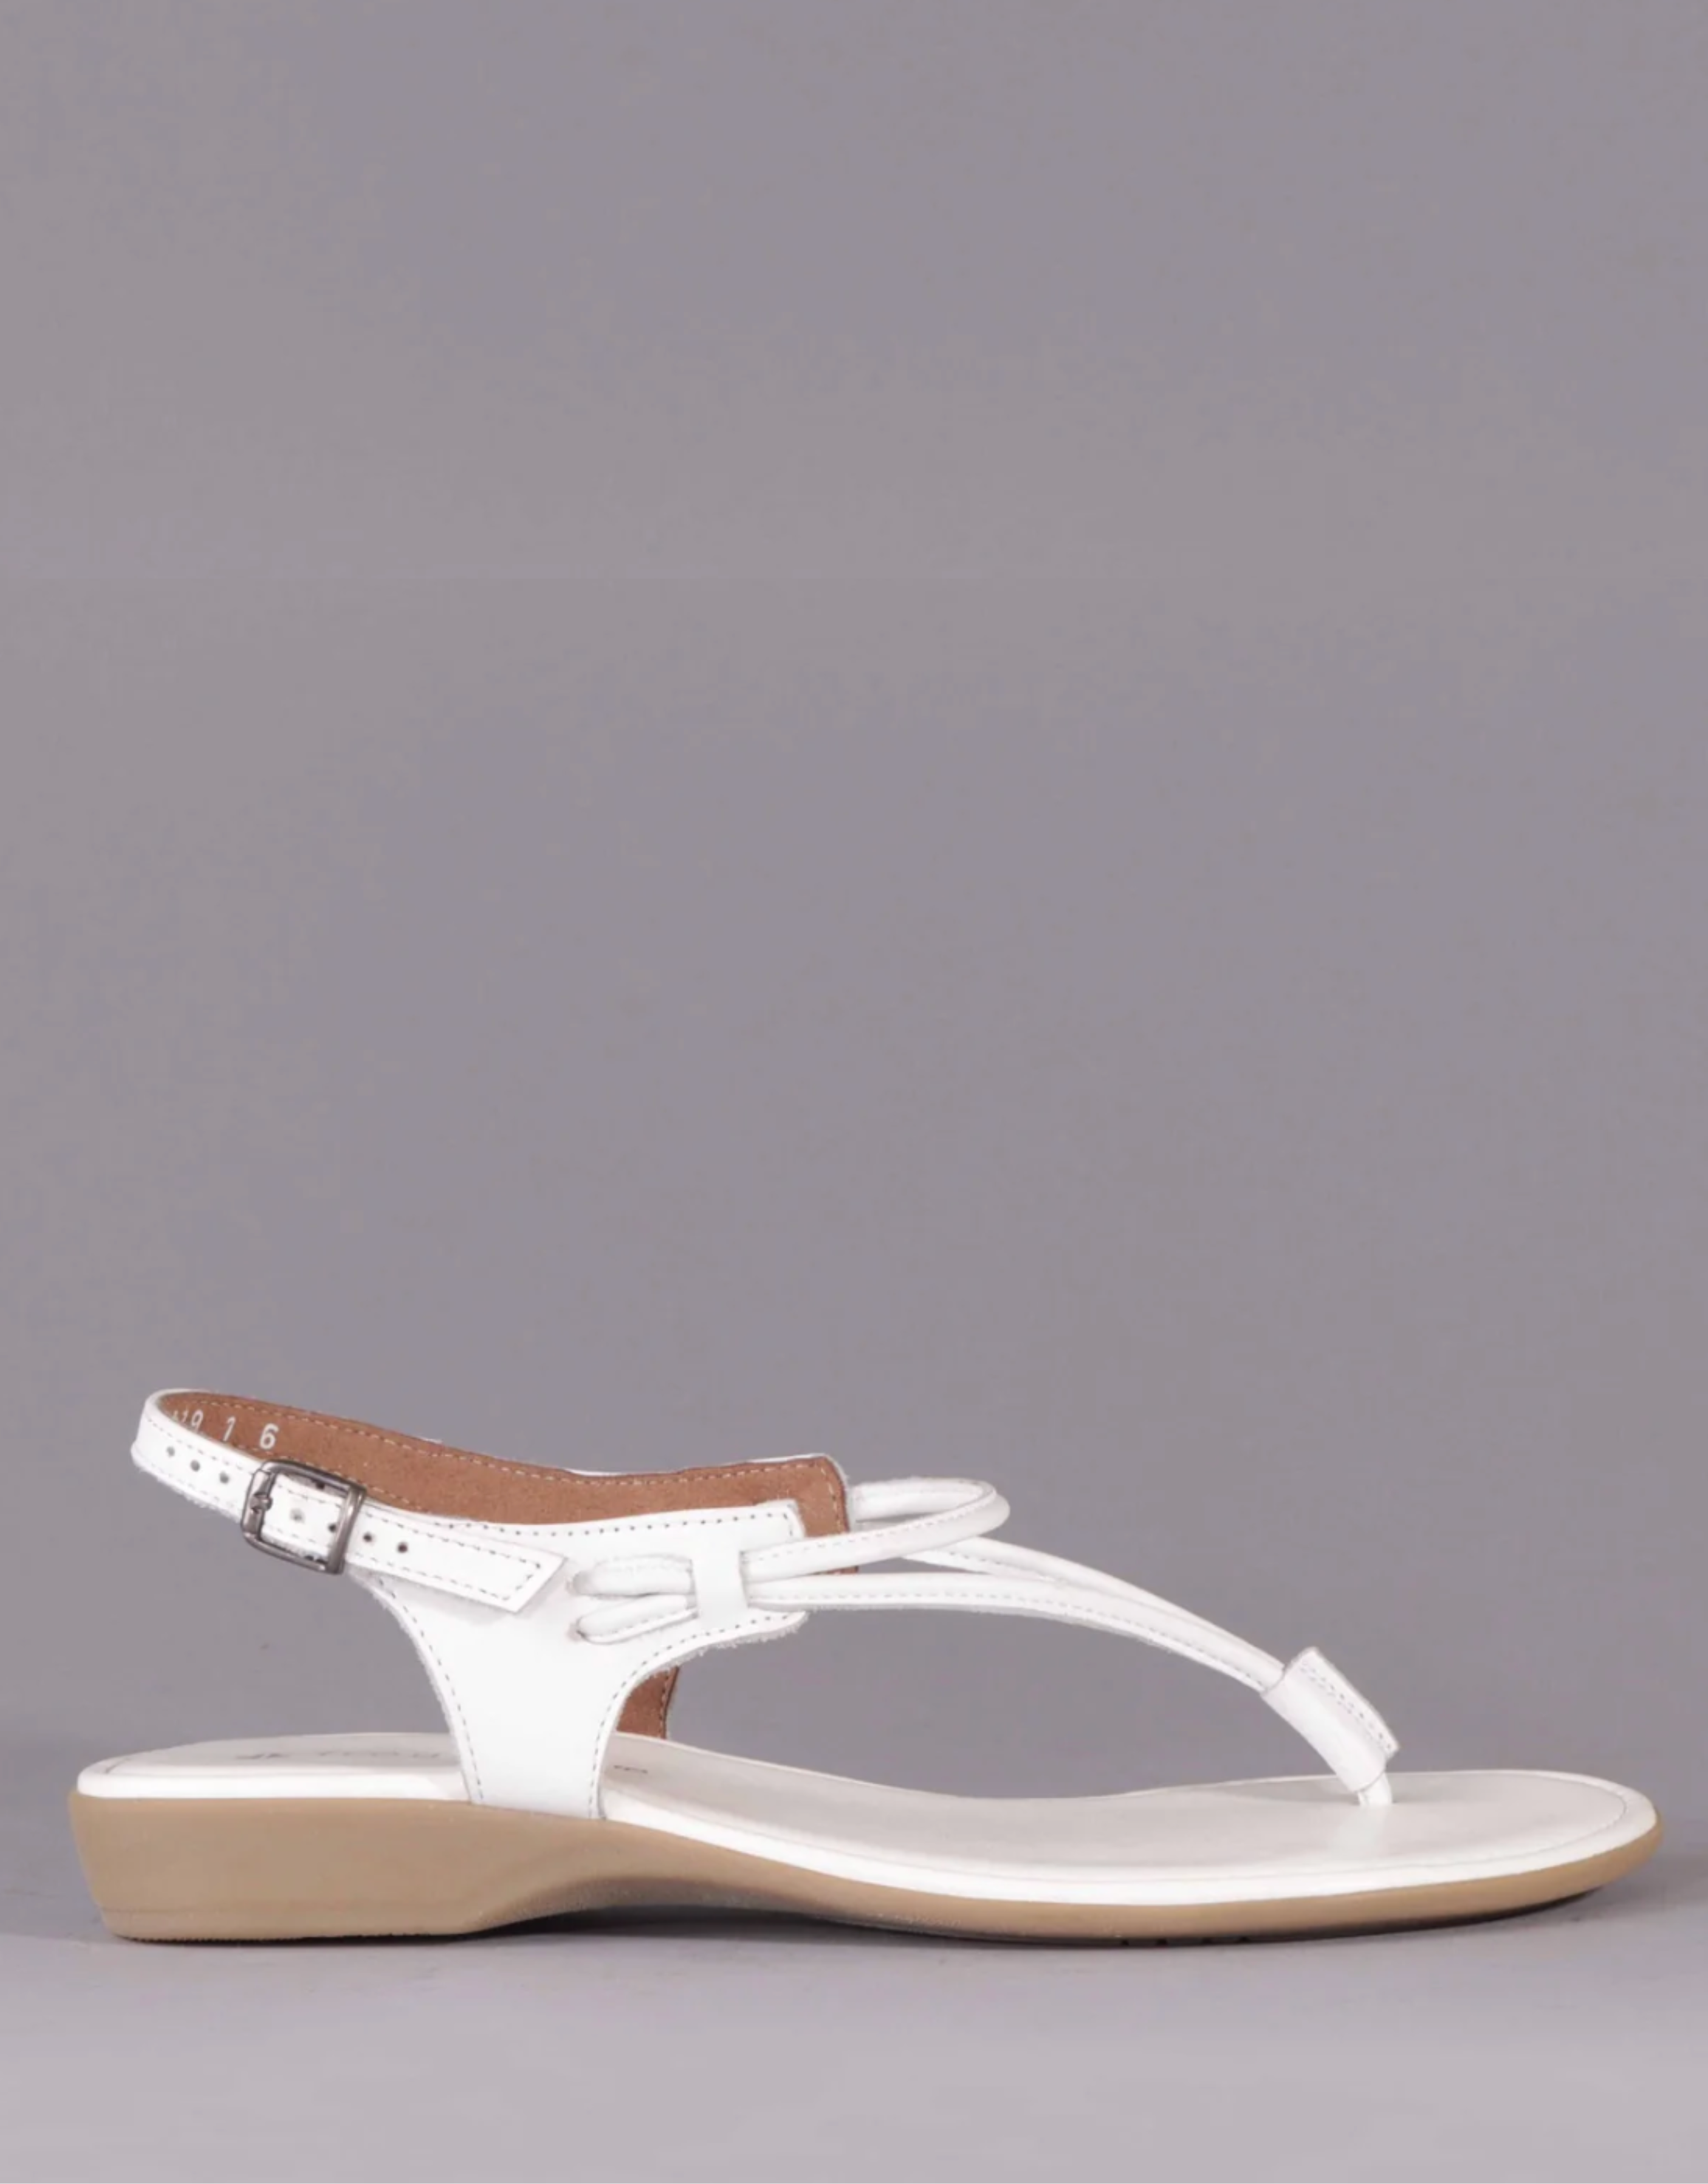 Jaey leather thong sandals in white - Gianvito Rossi | Mytheresa